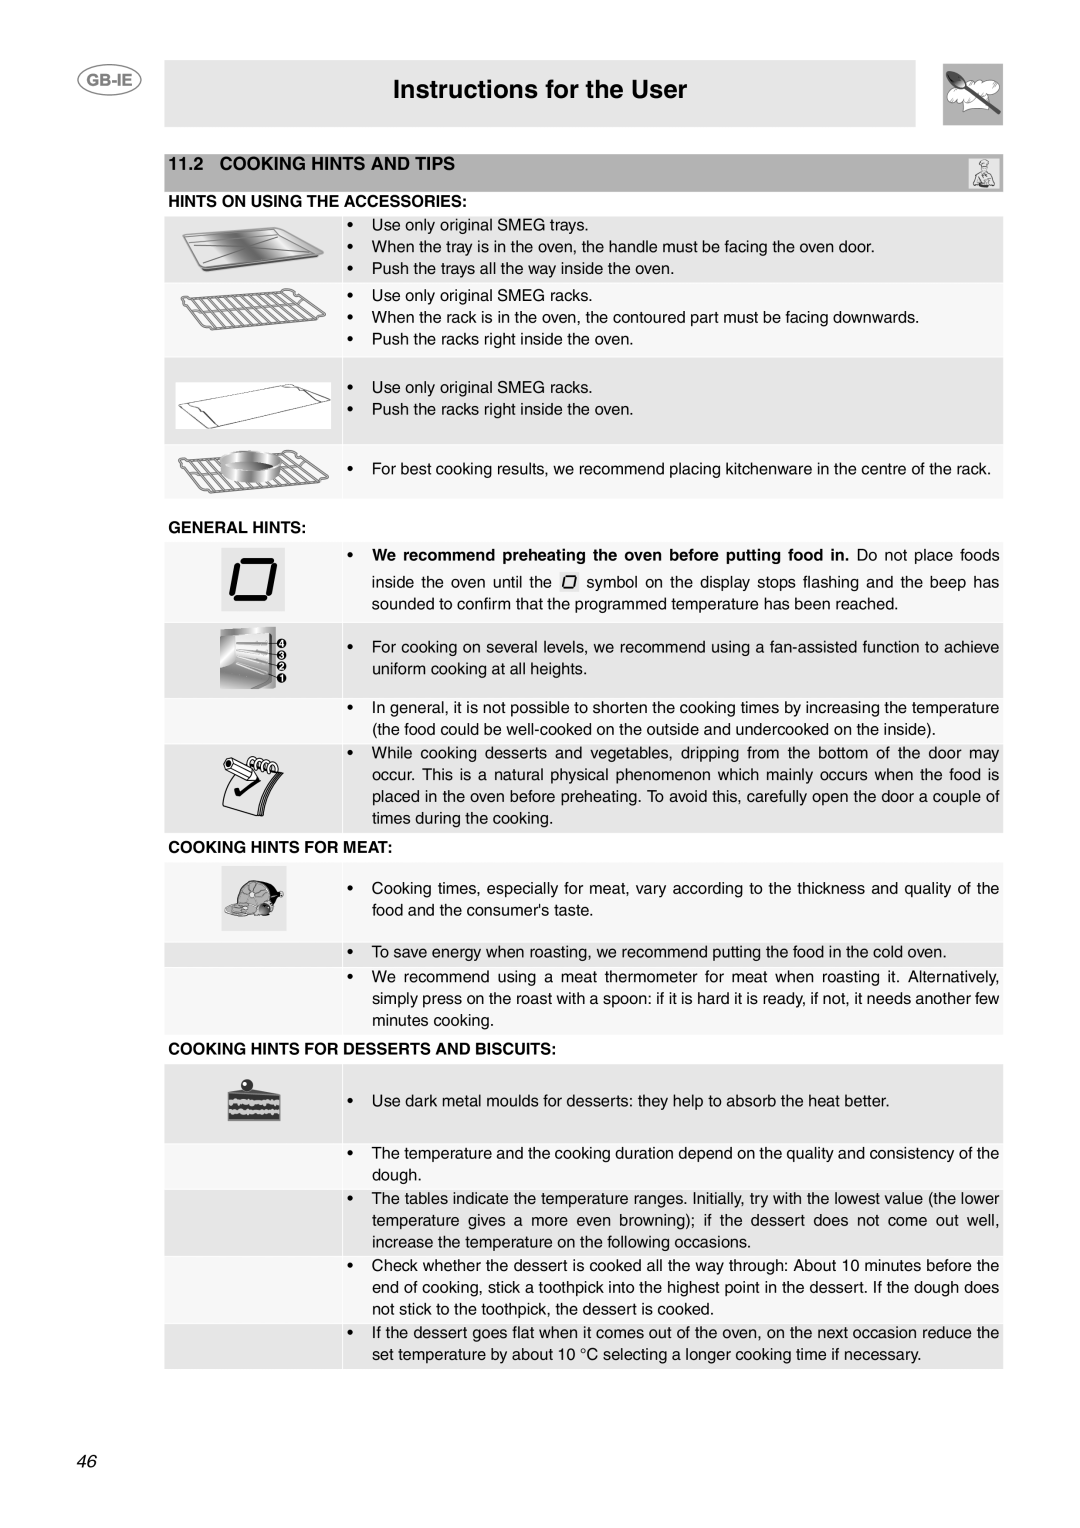 Smeg CE9IMX manual Instructions for the User, Cooking Hints And Tips, Hints On Using The Accessories, General Hints 